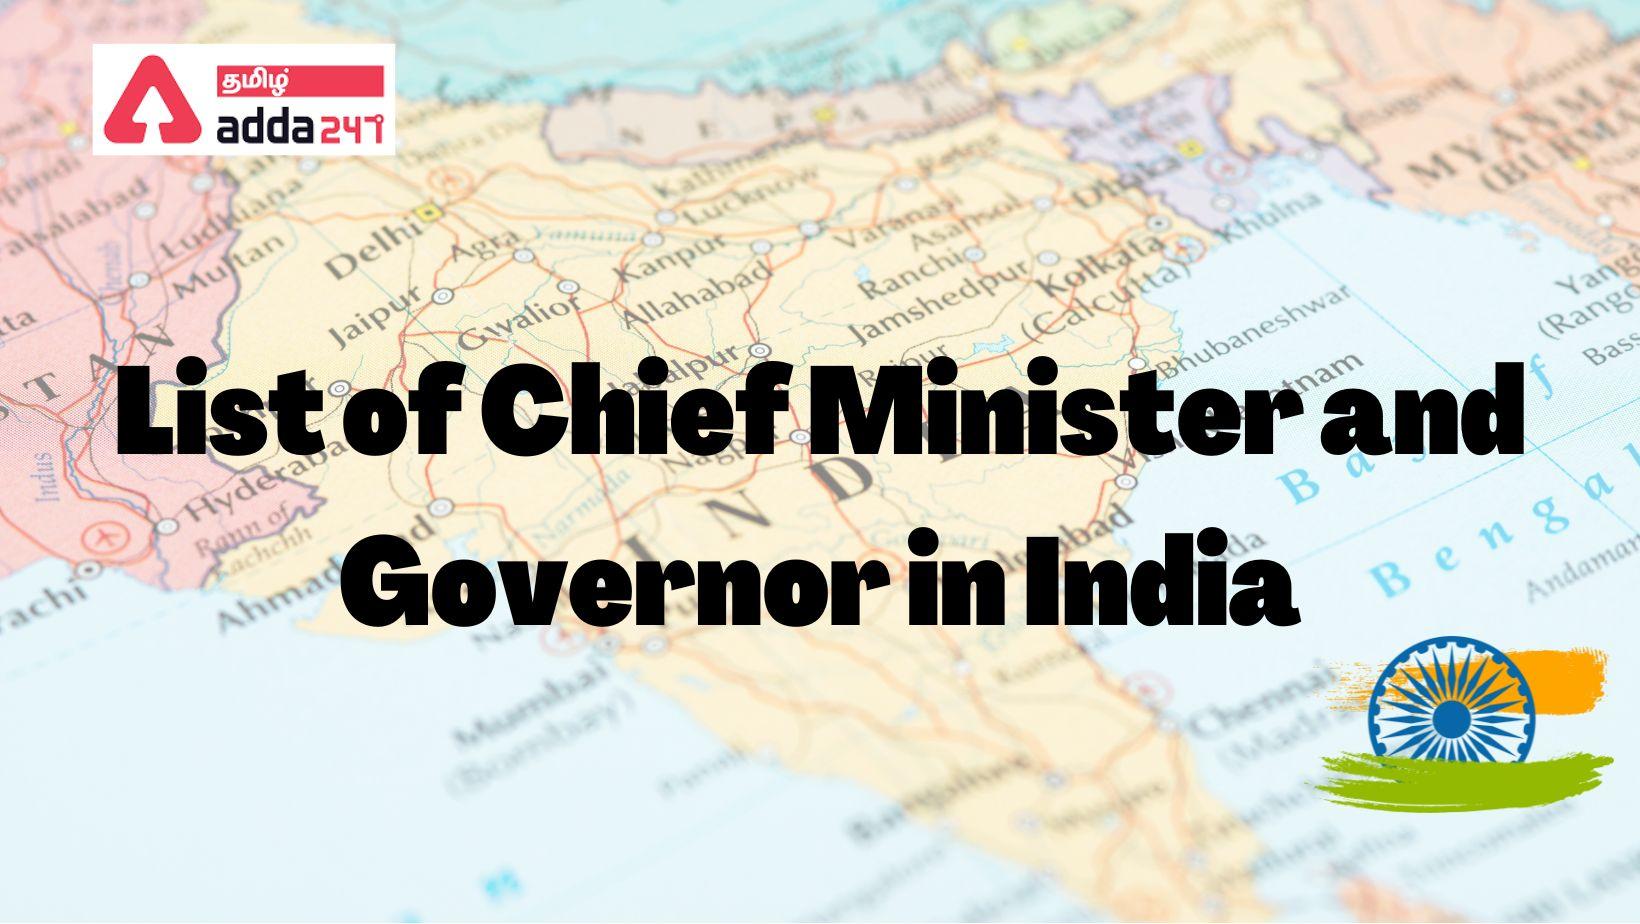 List of Chief Minister and Governor in India